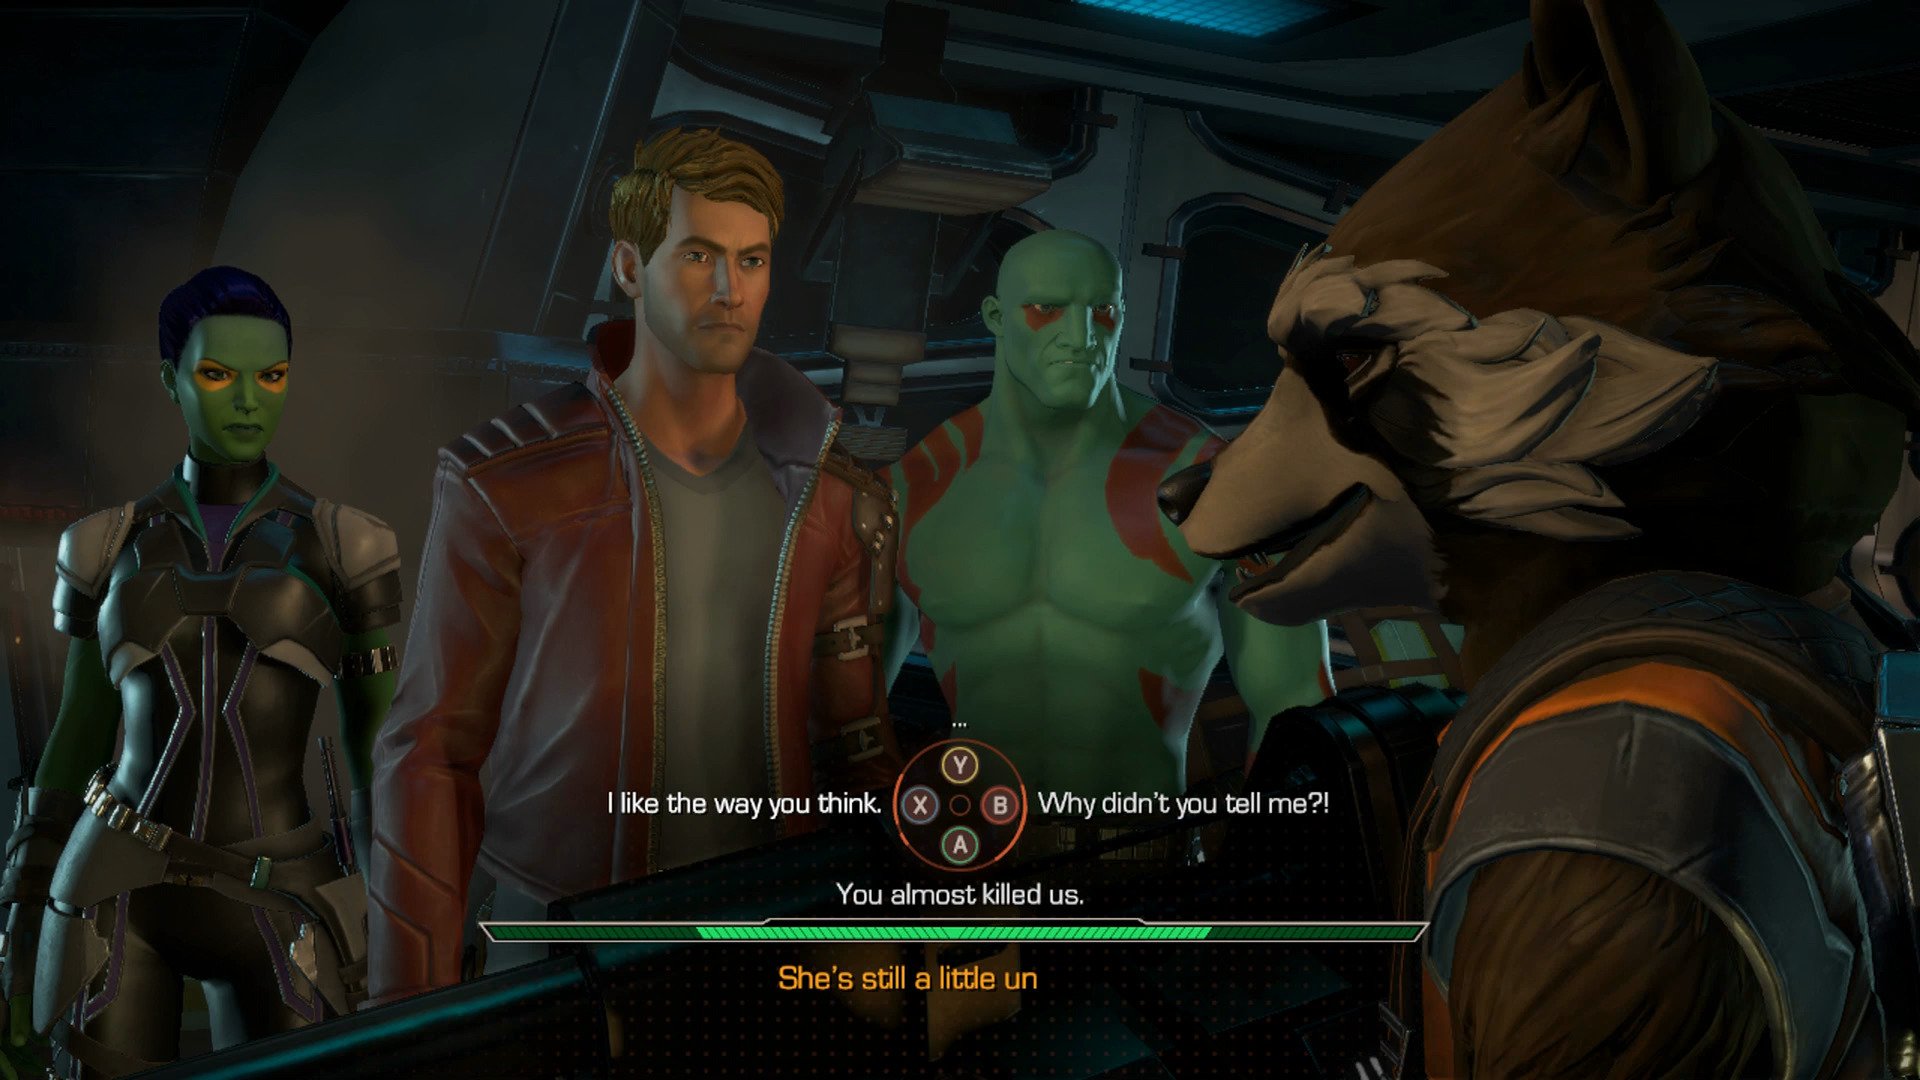 https://www.windowscentral.com/sites/wpcentral.com/files/styles/larger/public/field/image/2017/04/marvel-guardians-of-the-galaxy-telltale-series-episode-1-xbox-one-36.jpg?itok=Qay_MeCB